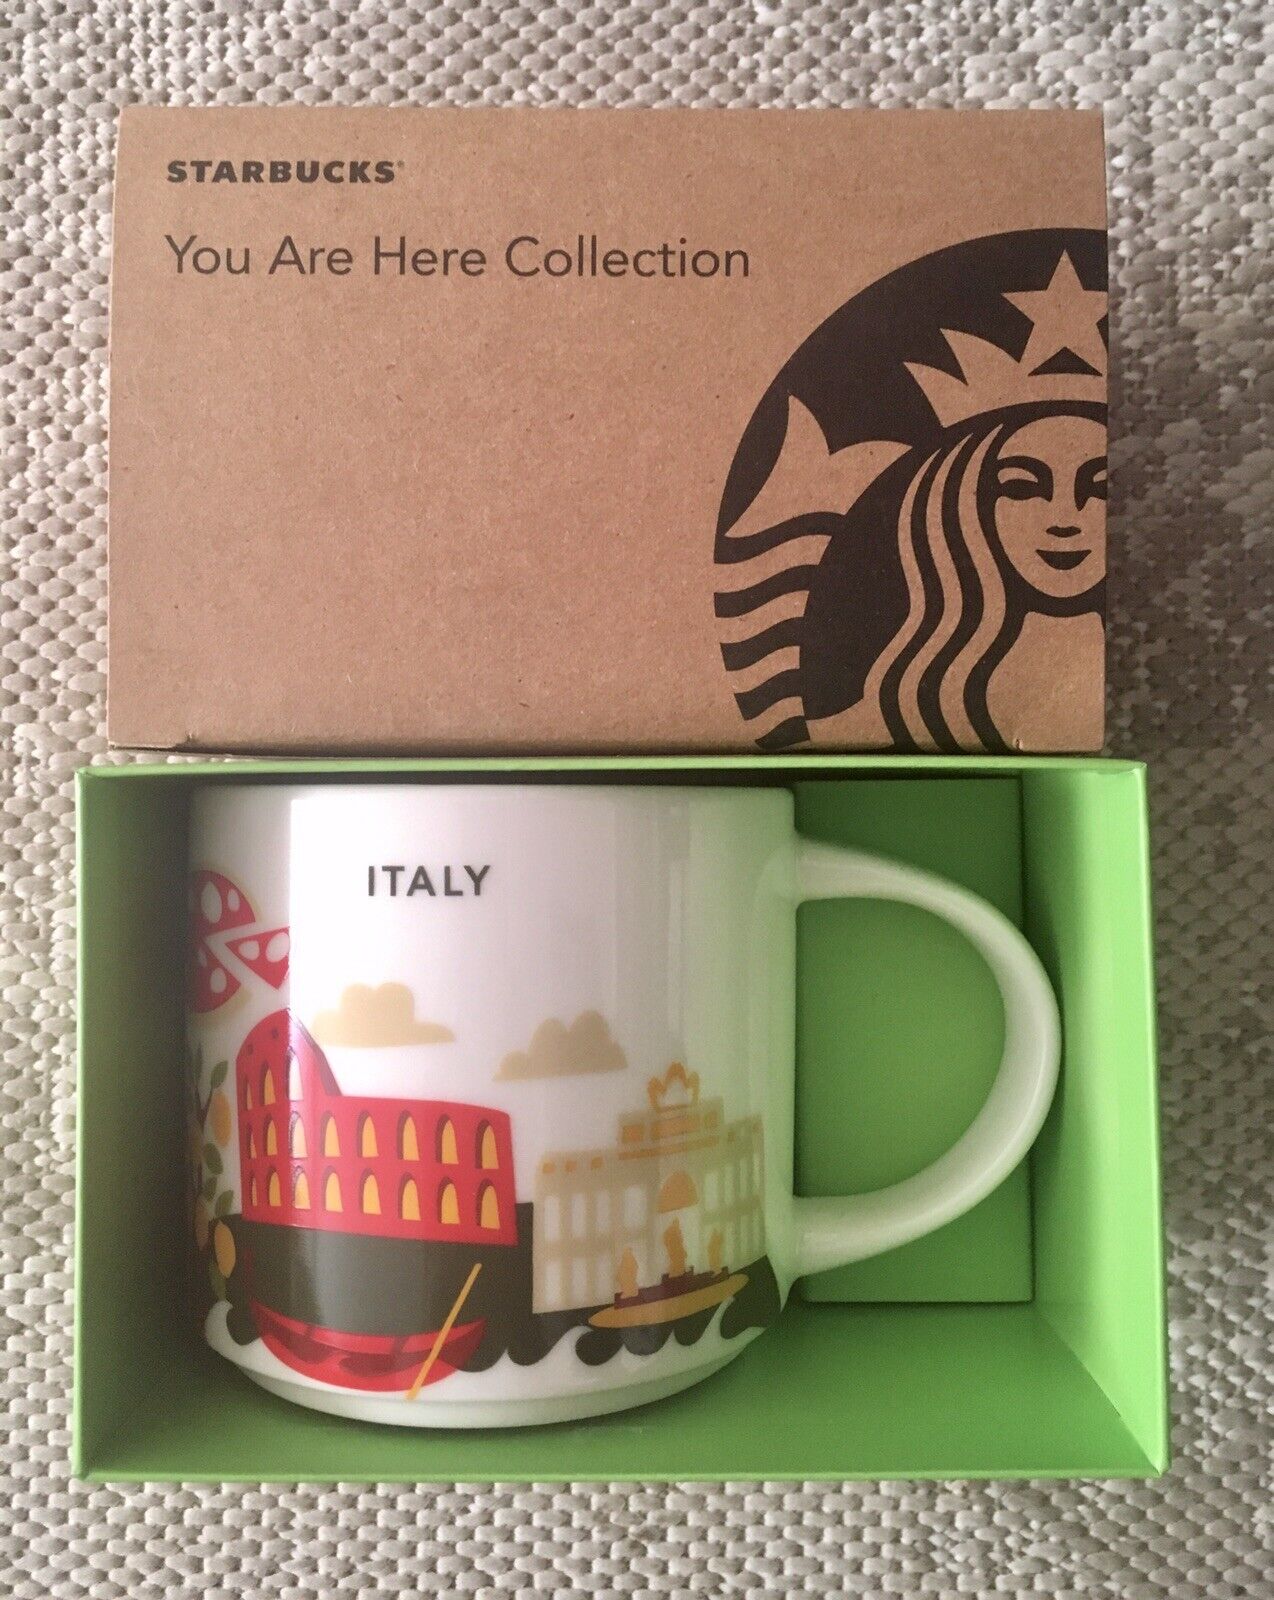 Starbucks You Are Here Collection Italy Ceramic Coffee Mug New With Box 14 oz